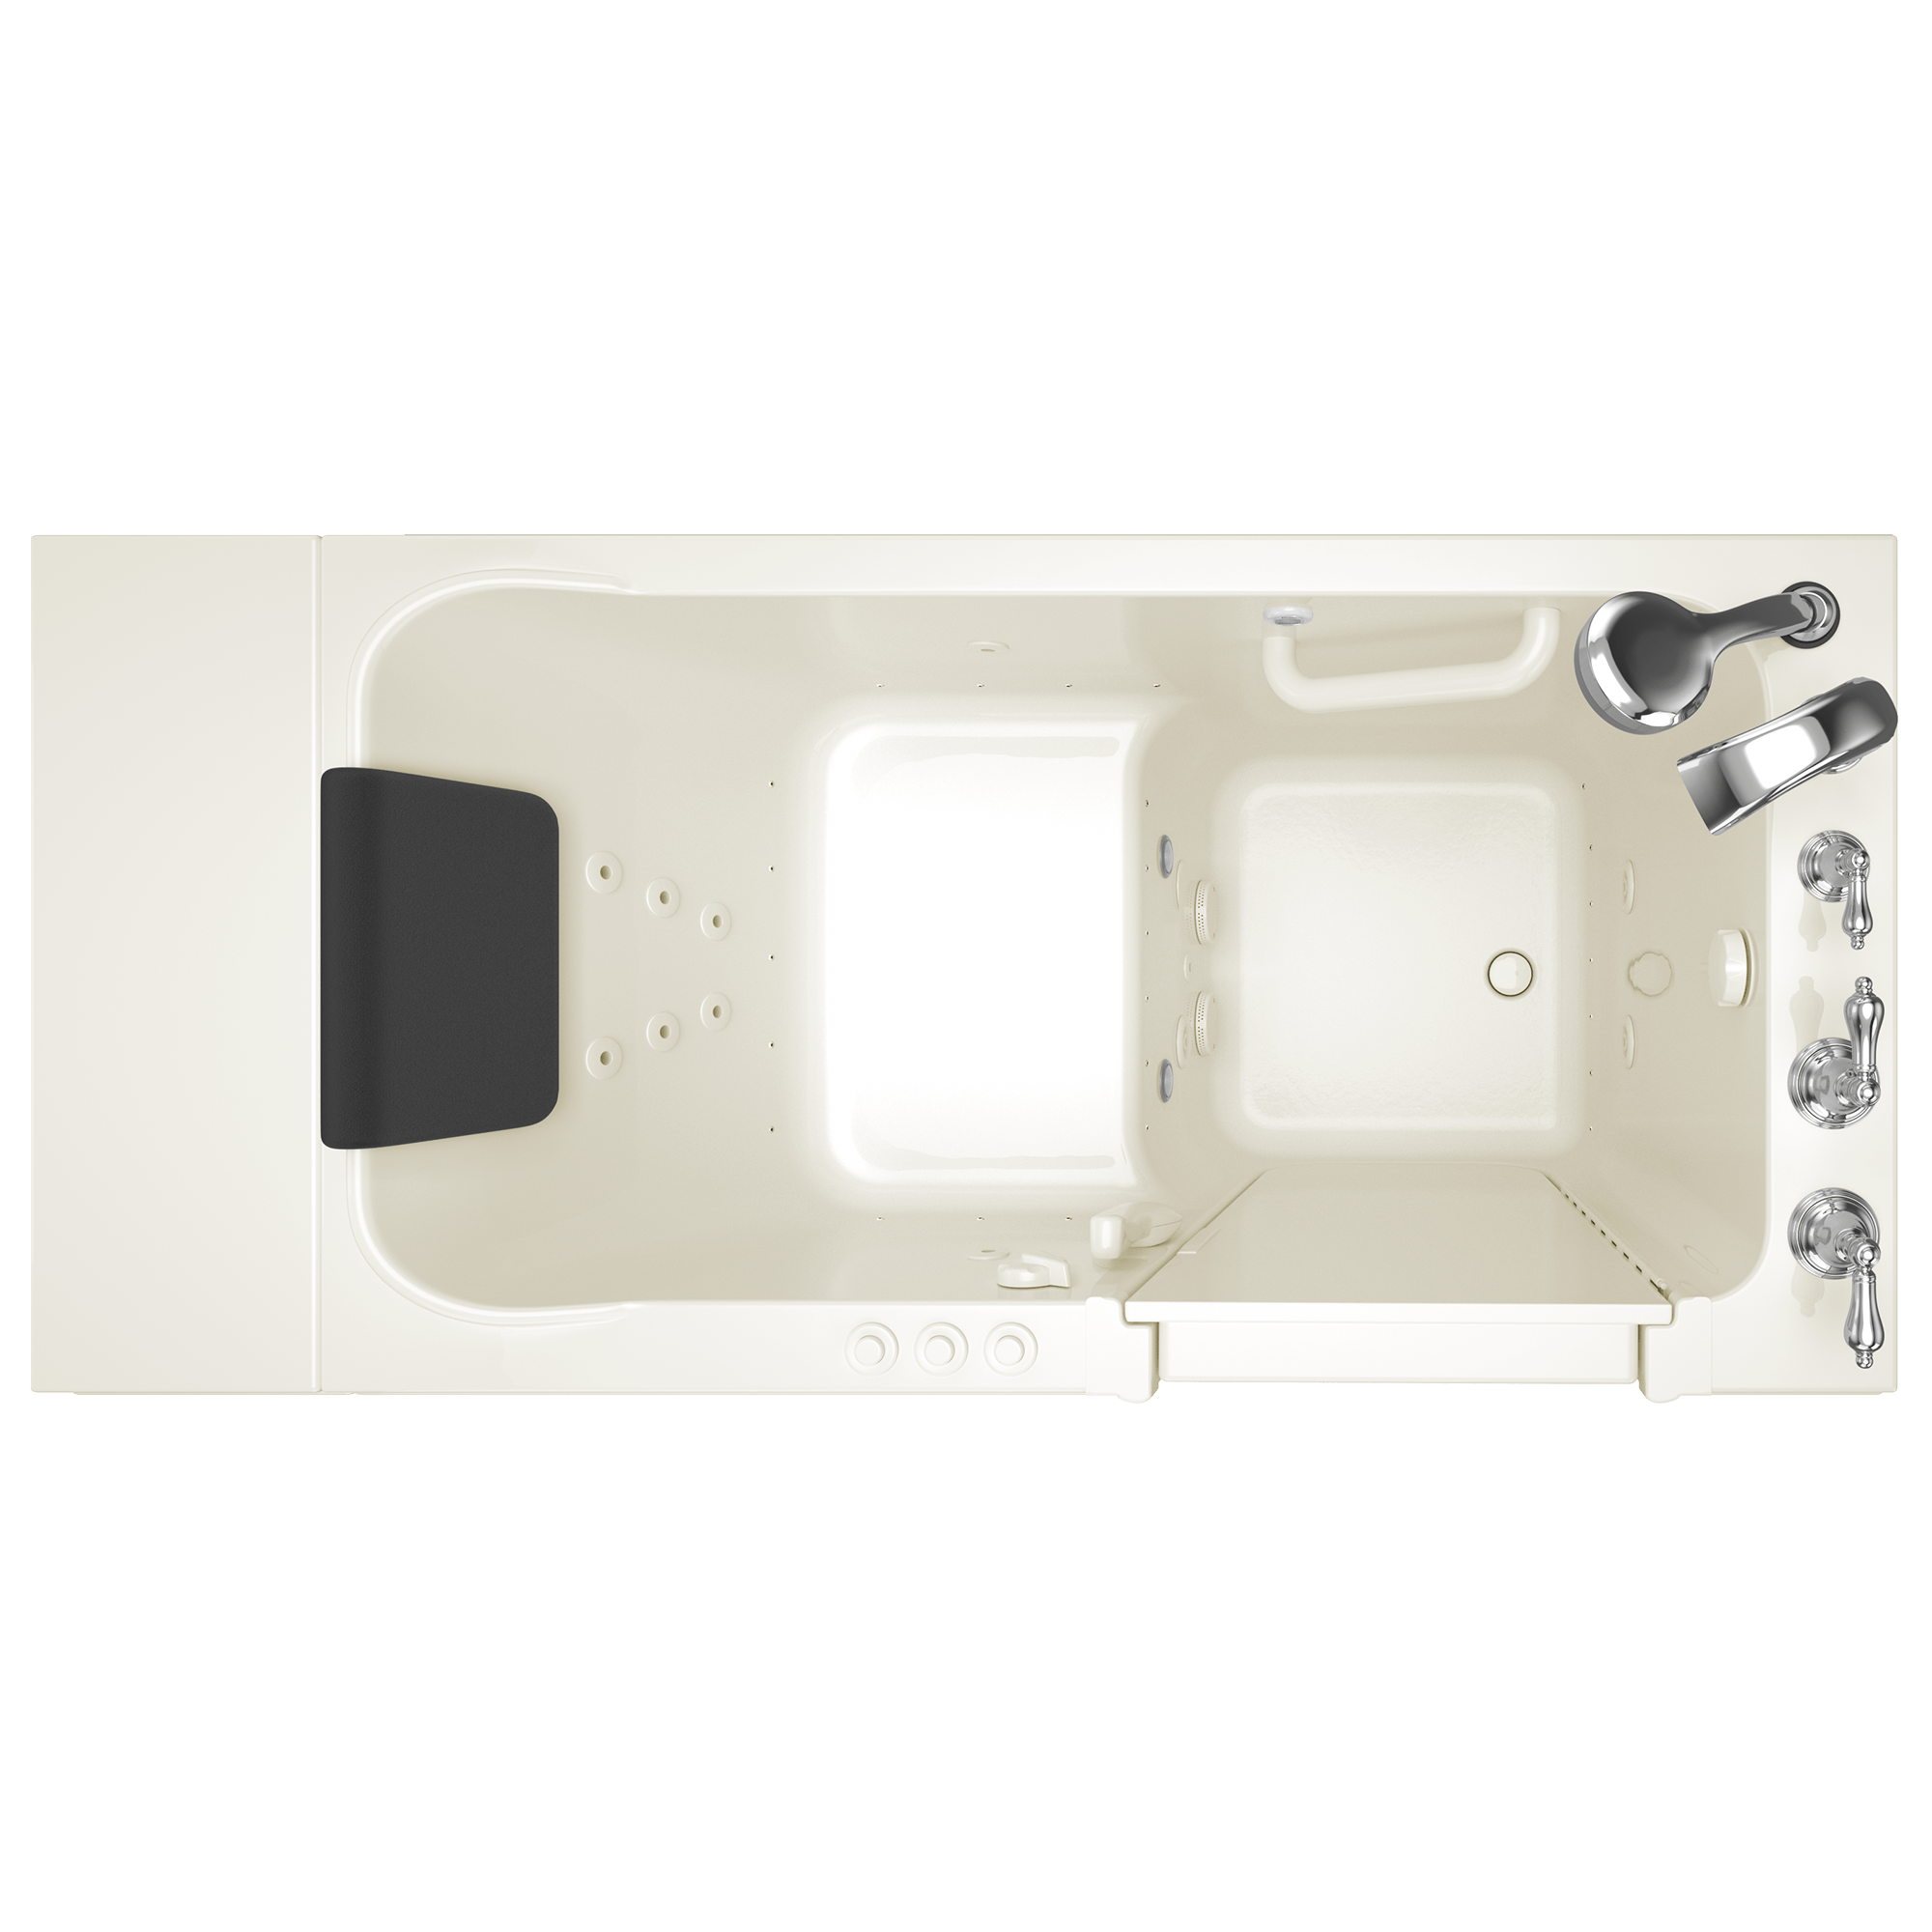 Acrylic Luxury Series 28 x 48-Inch Walk-in Tub With Combination Air Spa and Whirlpool Systems - Right-Hand Drain With Faucet